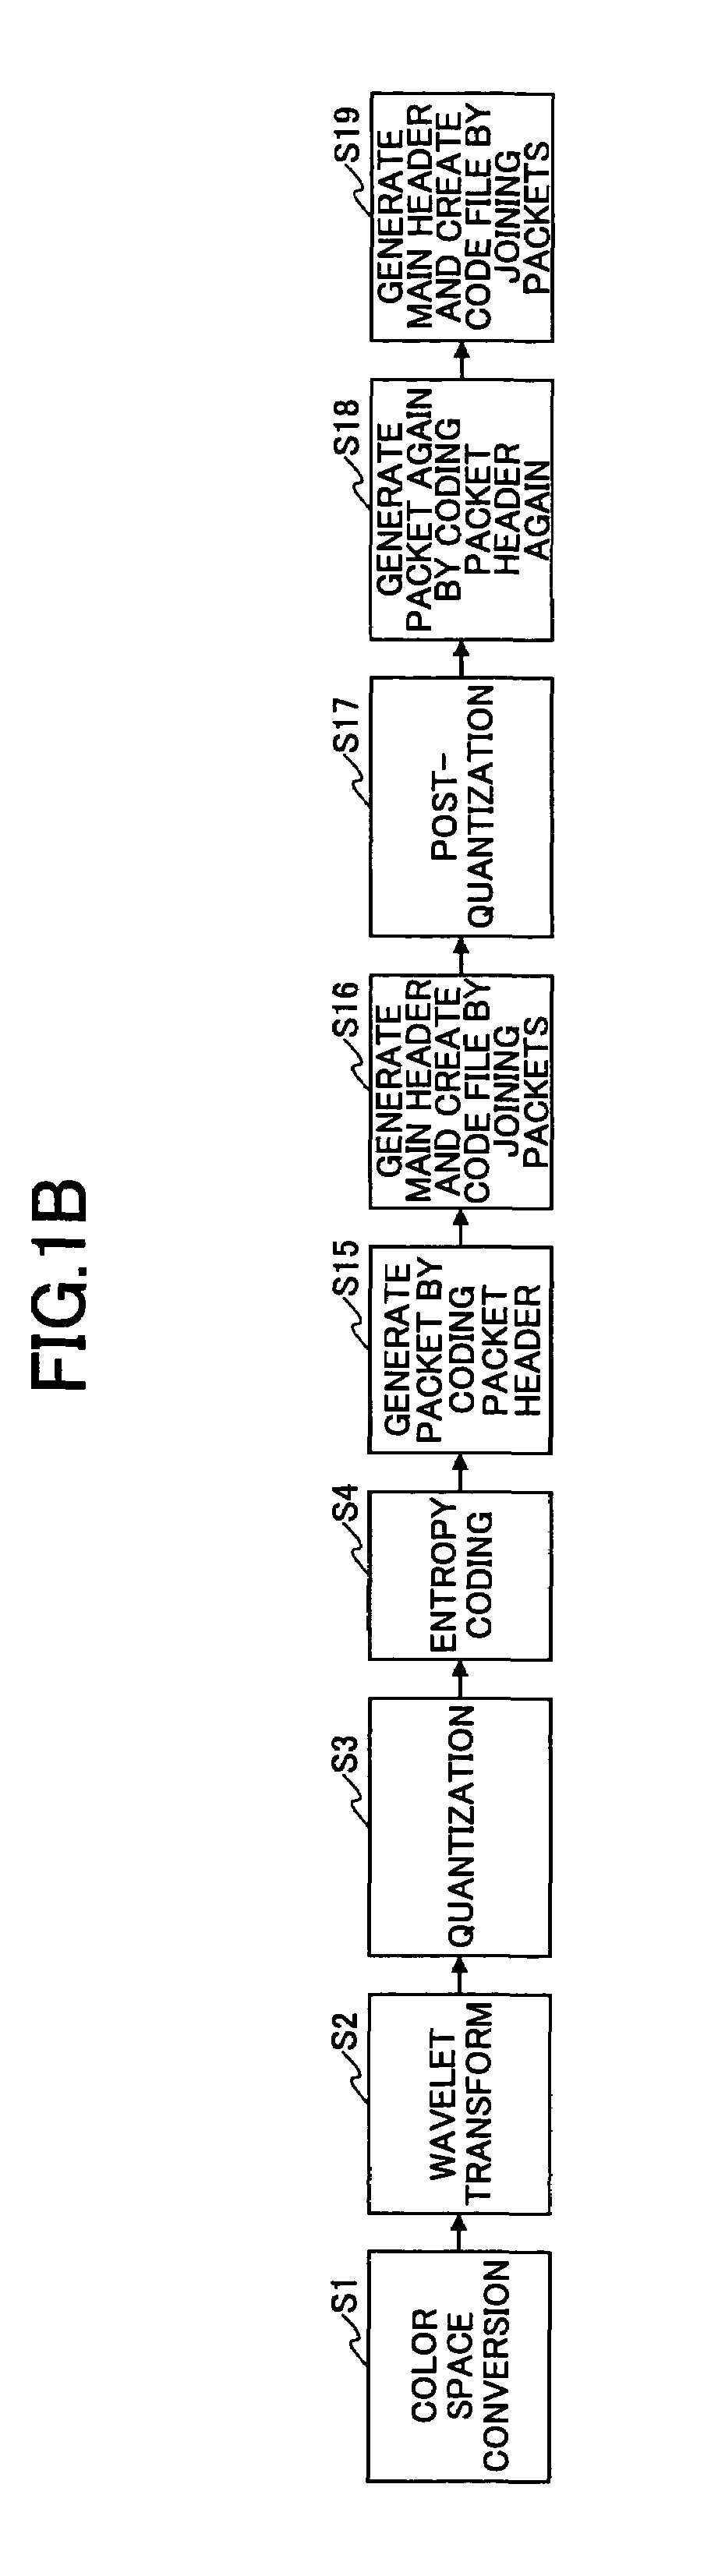 Image processing apparatus, image processing method, program, and recording medium that allow setting of most appropriate post-quantization condition